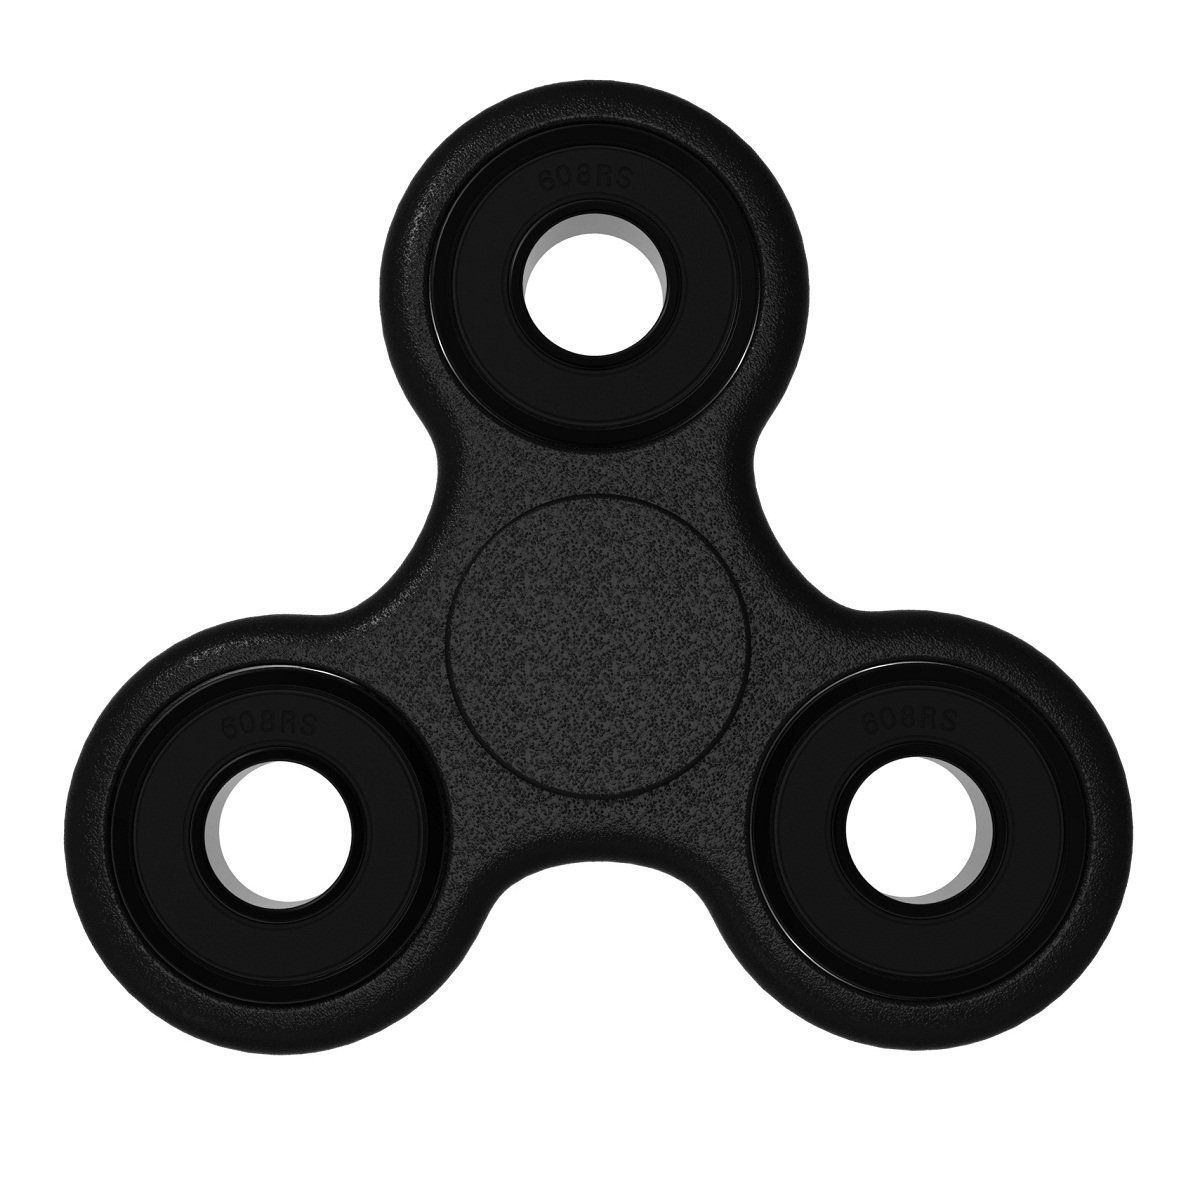 MerryXD Fidget Hand Spinner Toy Black Premium Bearing High Speed Perfect For ADD, ADHD, Anxiety, and Autism Adult Children